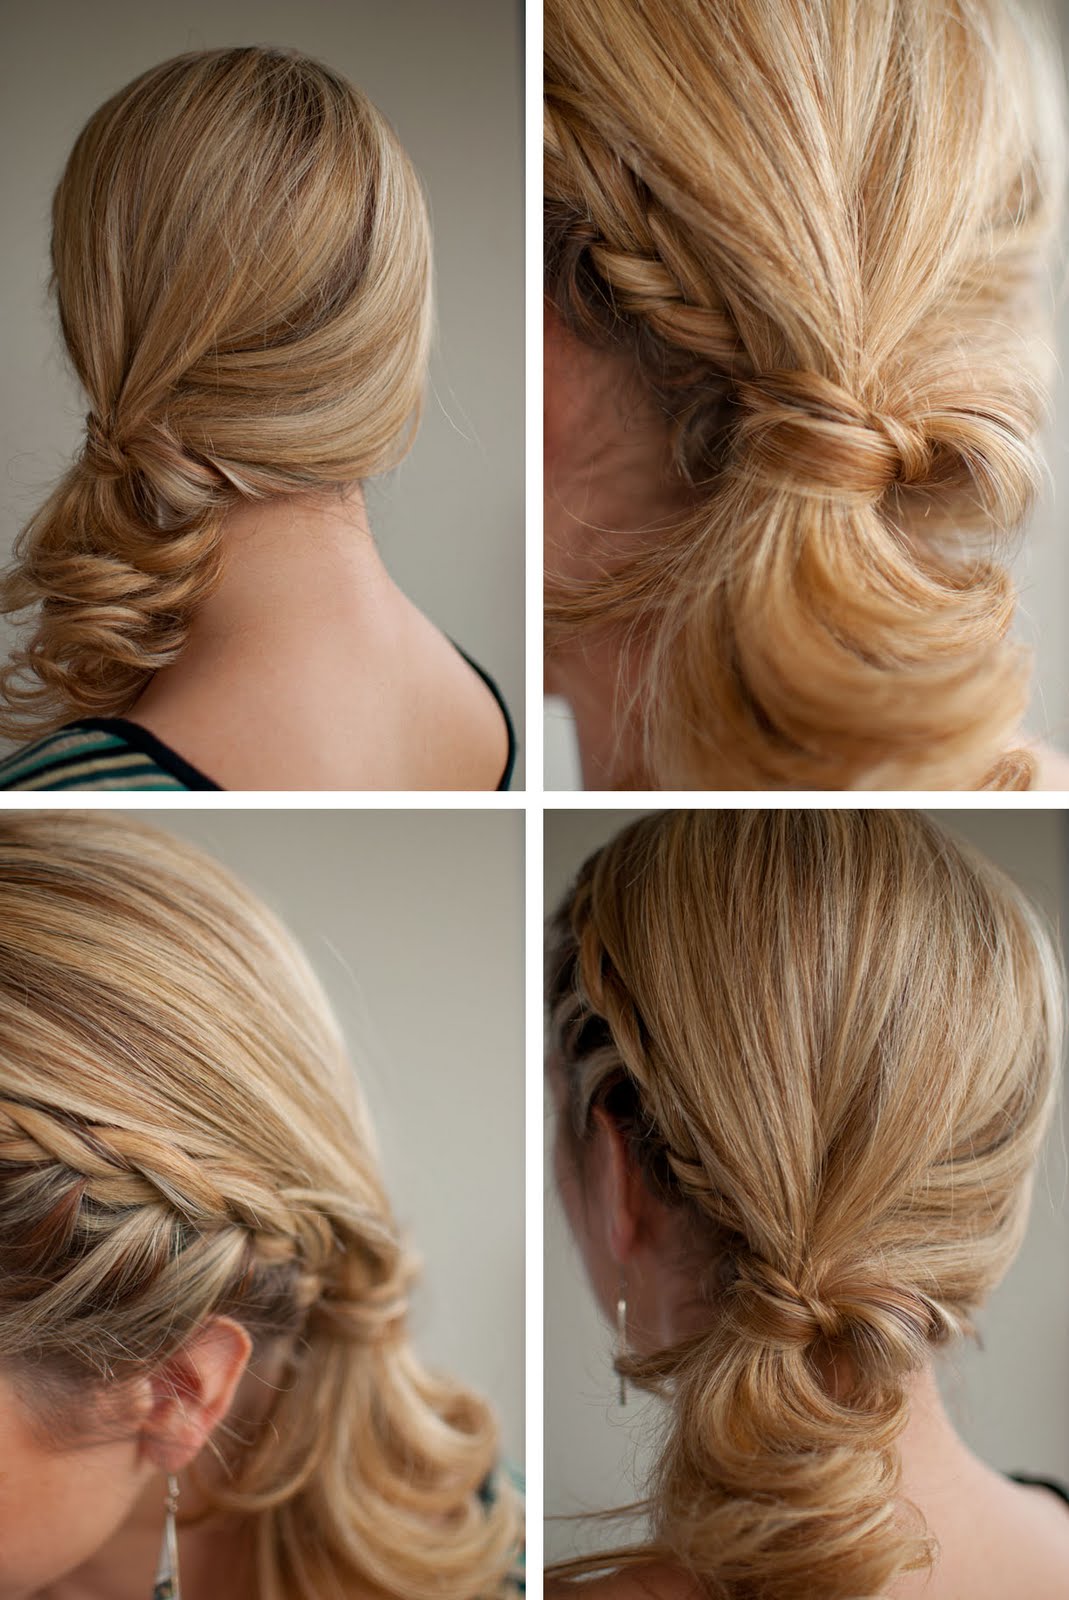 Kak Nasik Different Types Of Hairstyles For Women 2012